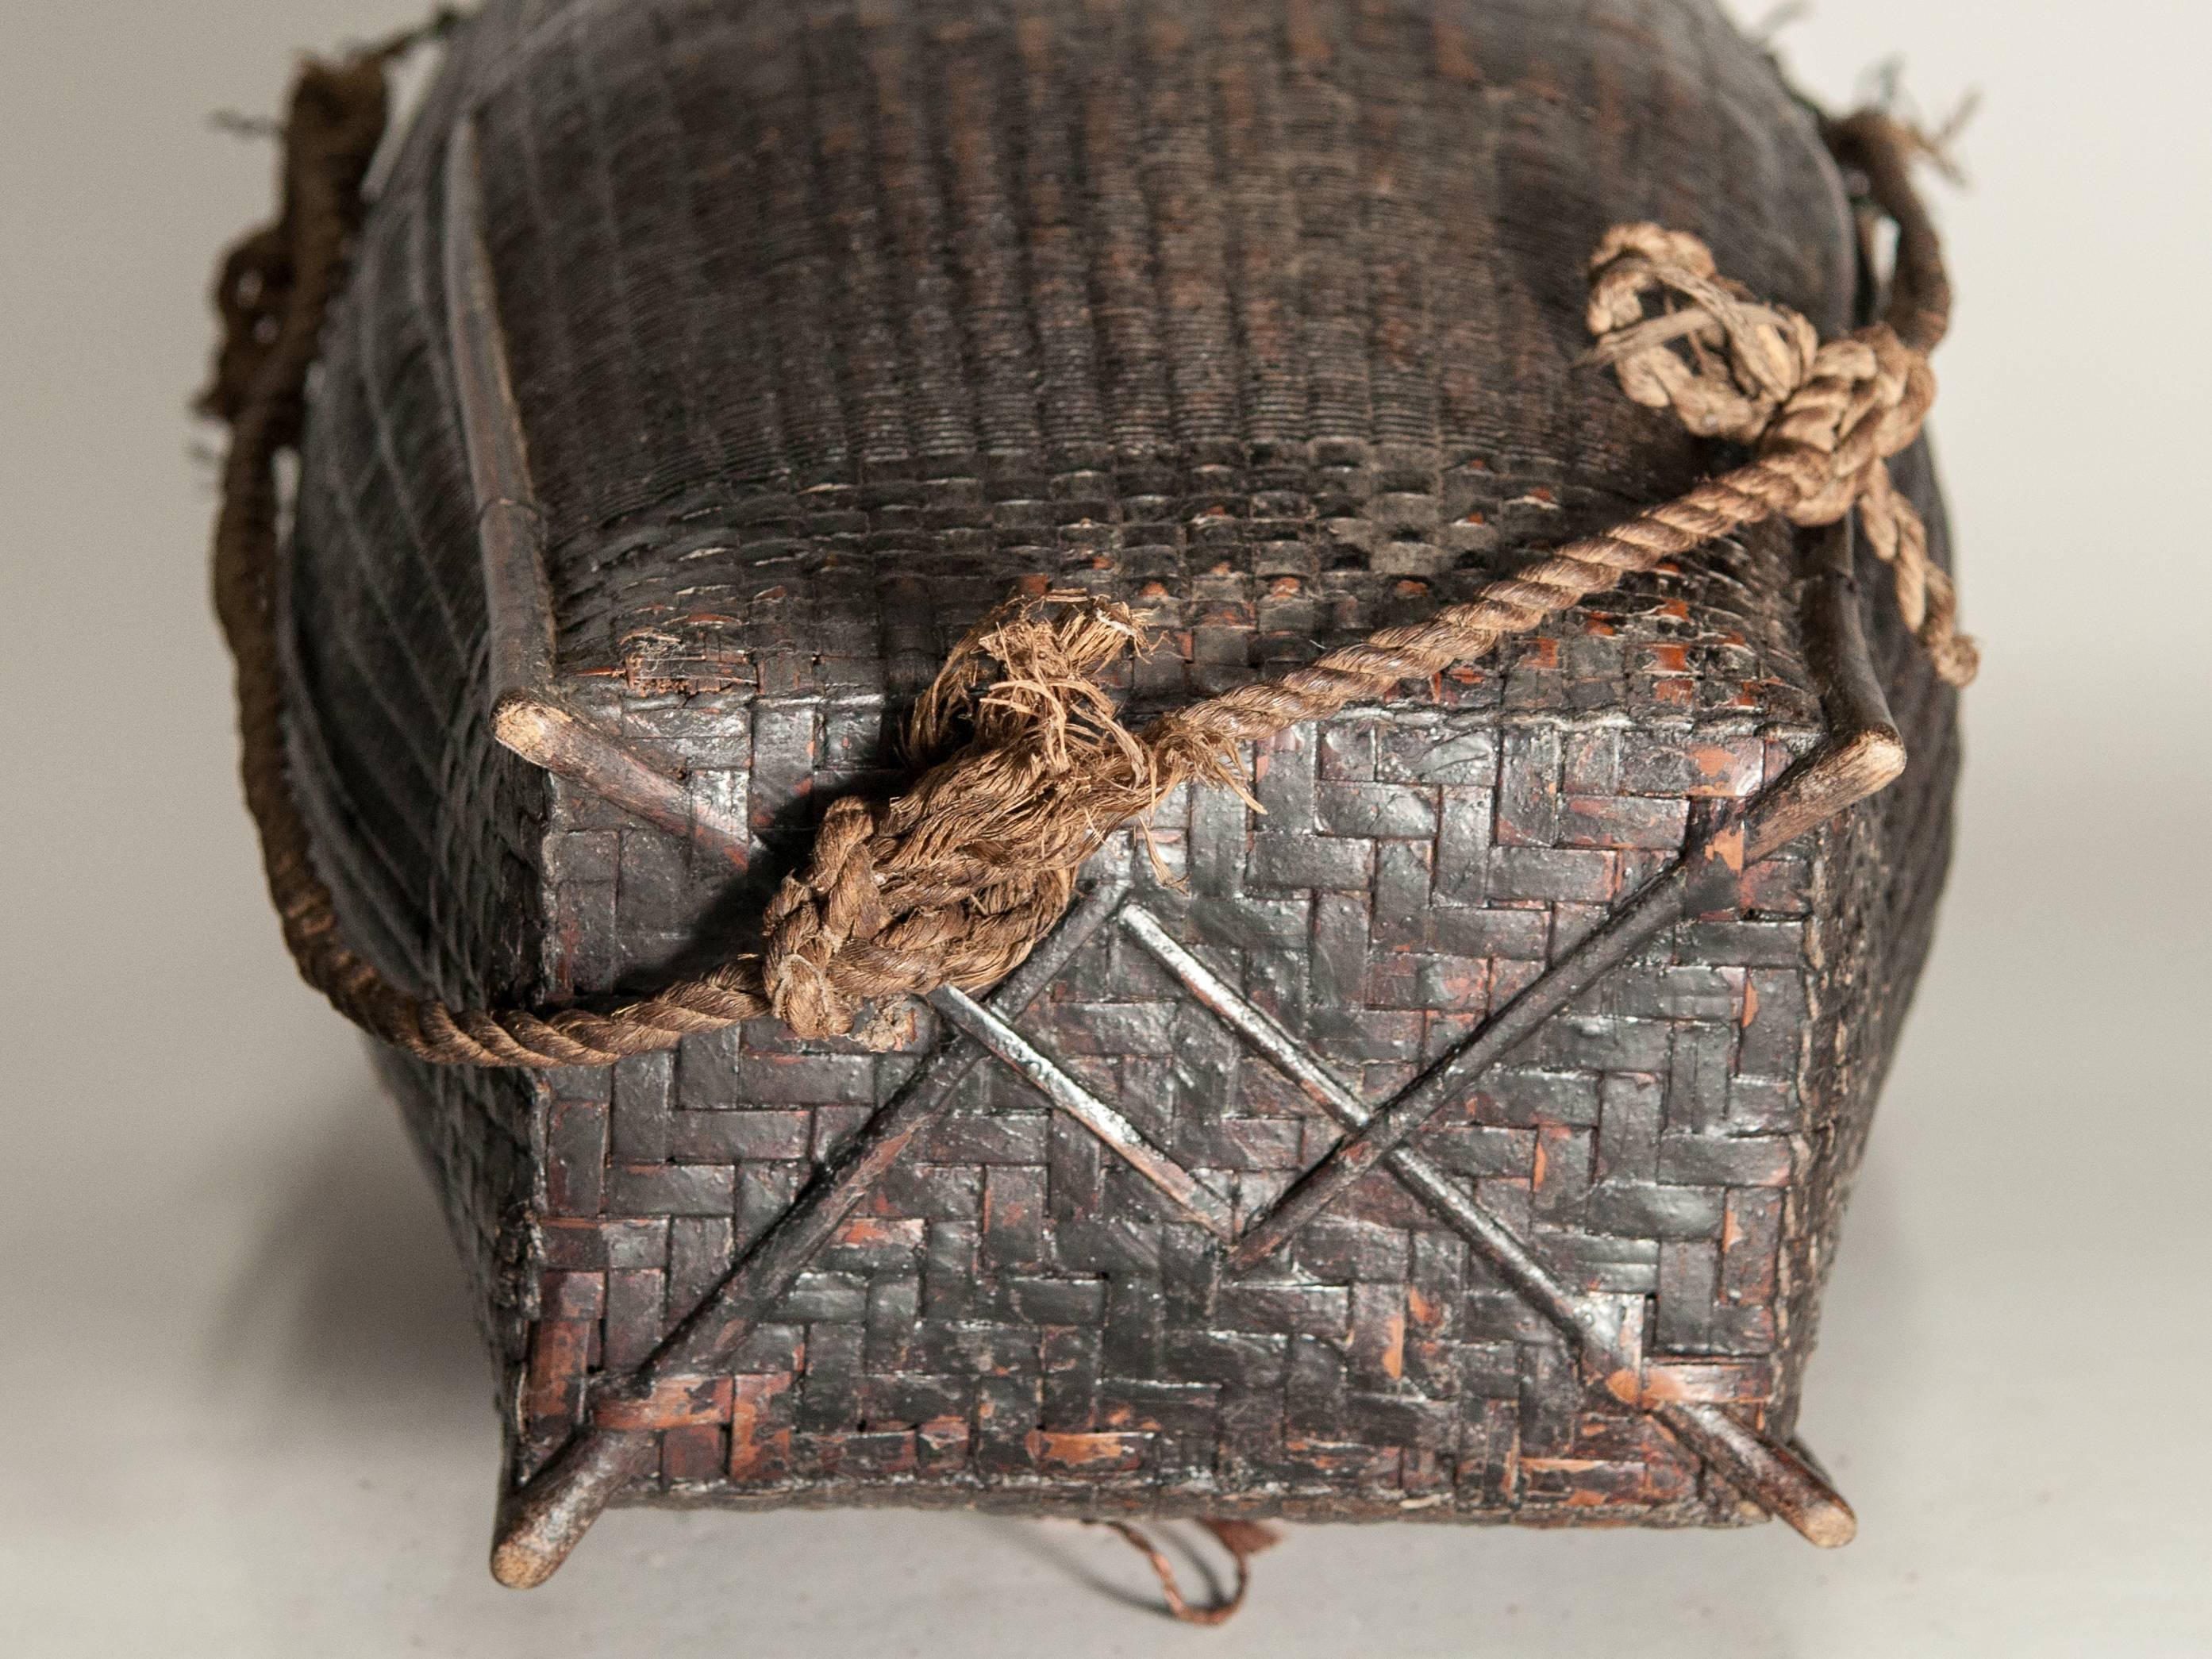 Tribal Storage Basket with Lid and Lacquer, Karen of Burma, Mid-20th Century 11